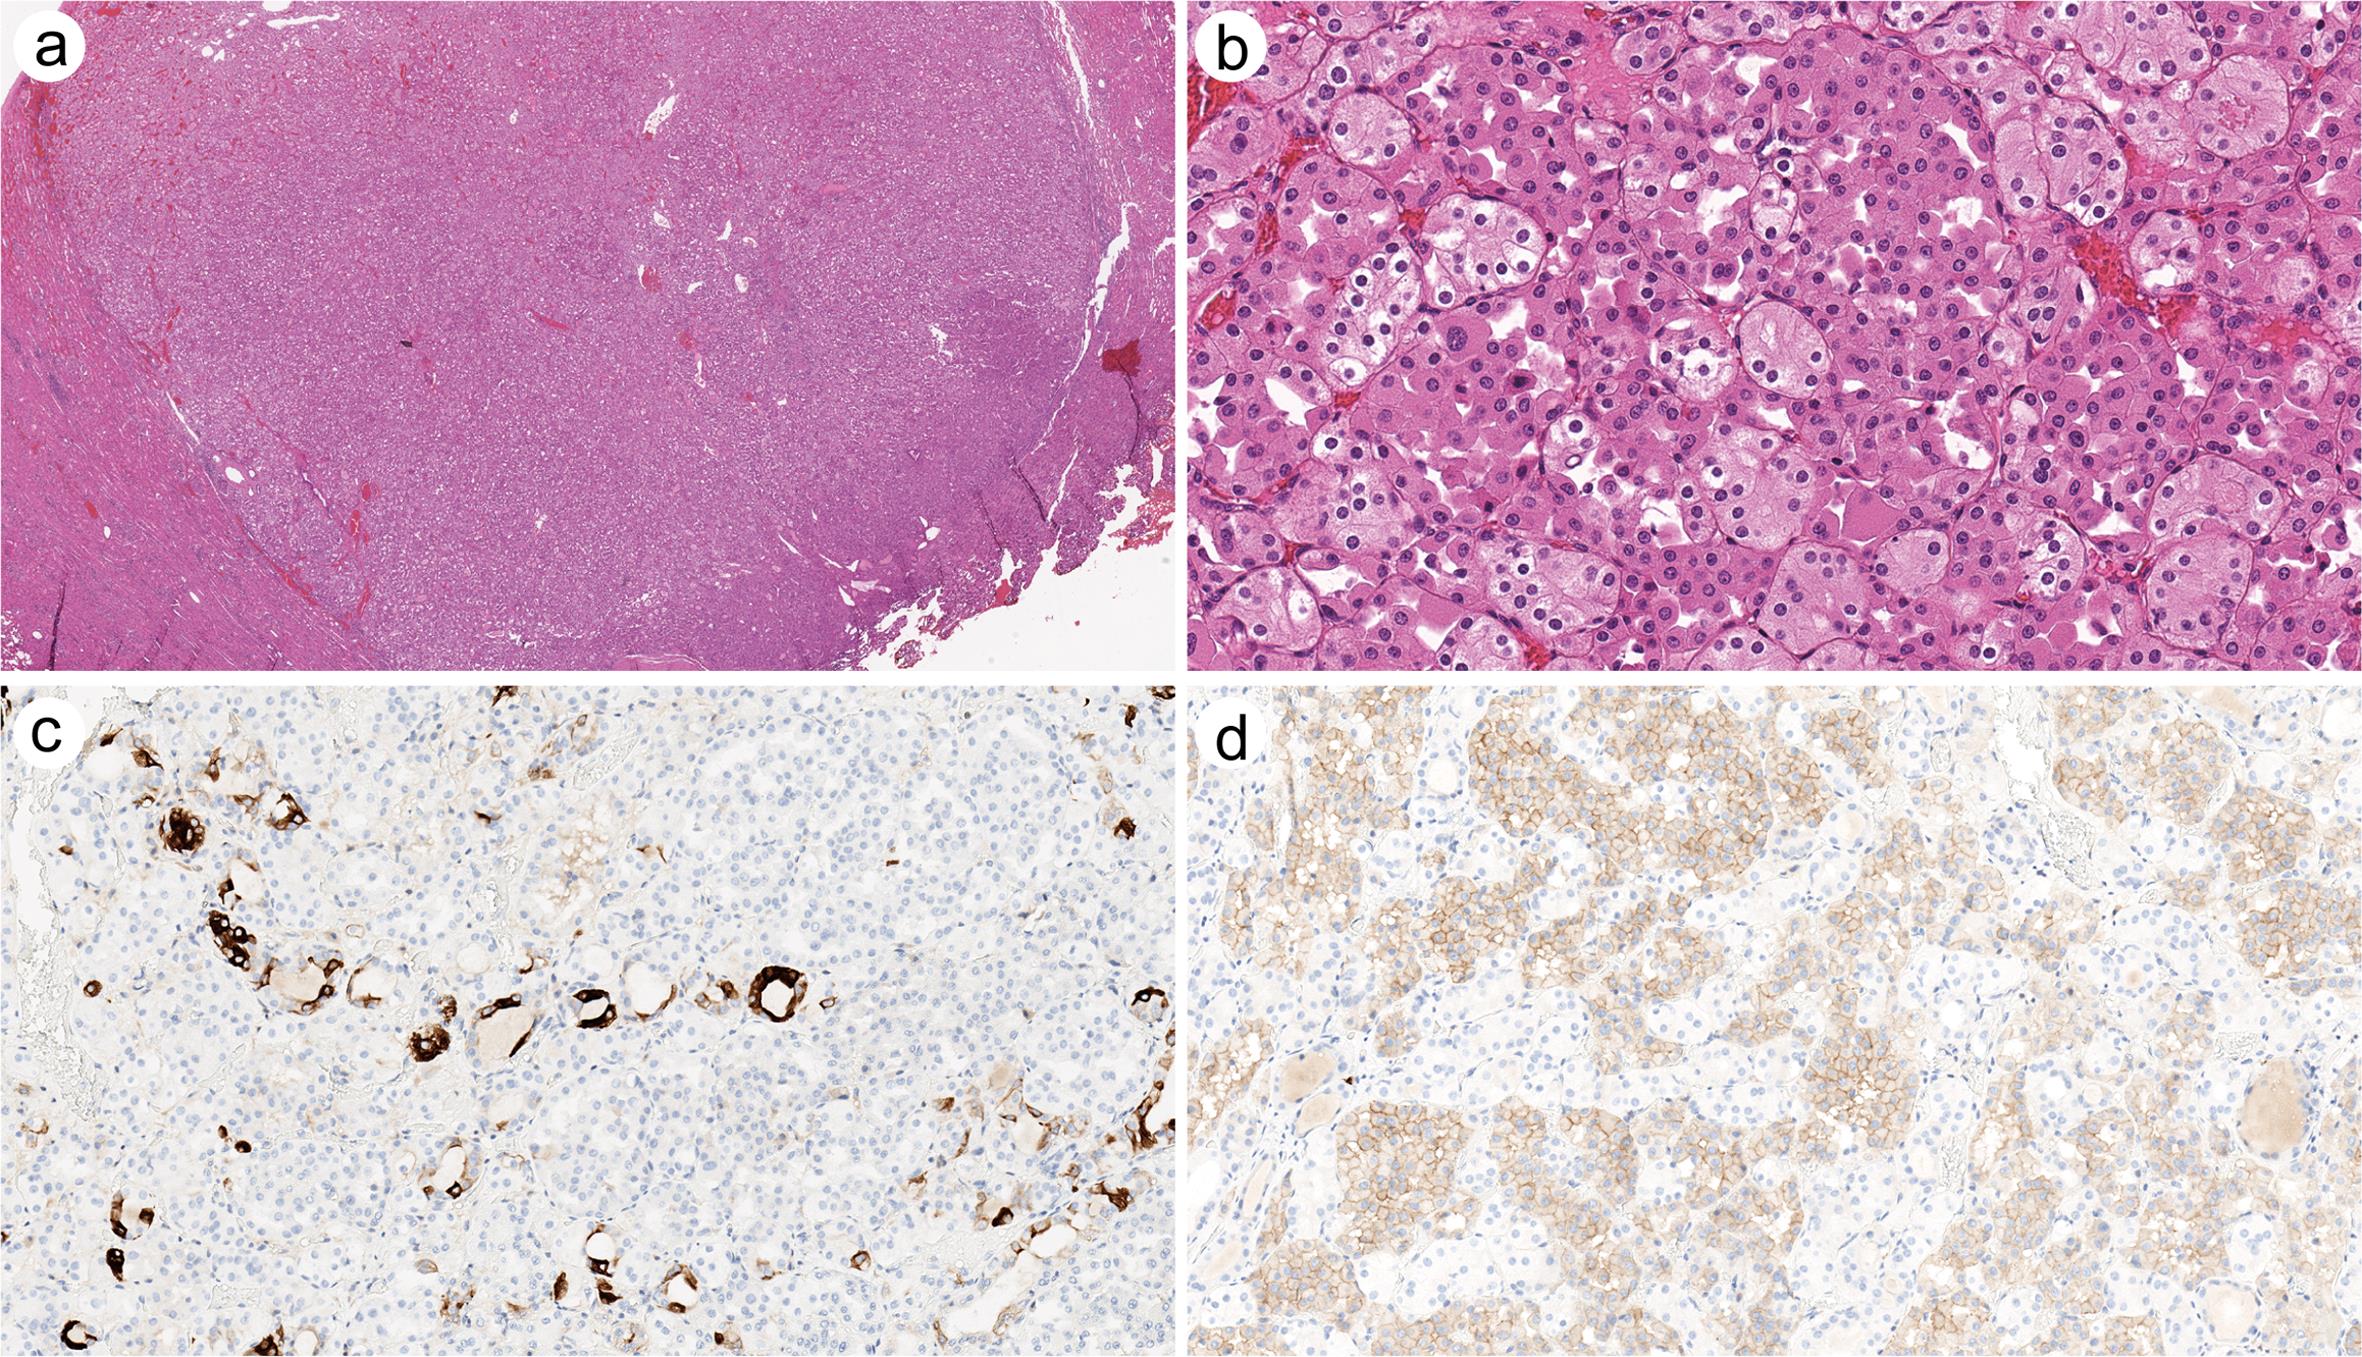 A hybrid oncocytic/chromophobe renal tumor (HOCT) from a patient with Birt-Hogg-Dube syndrome.